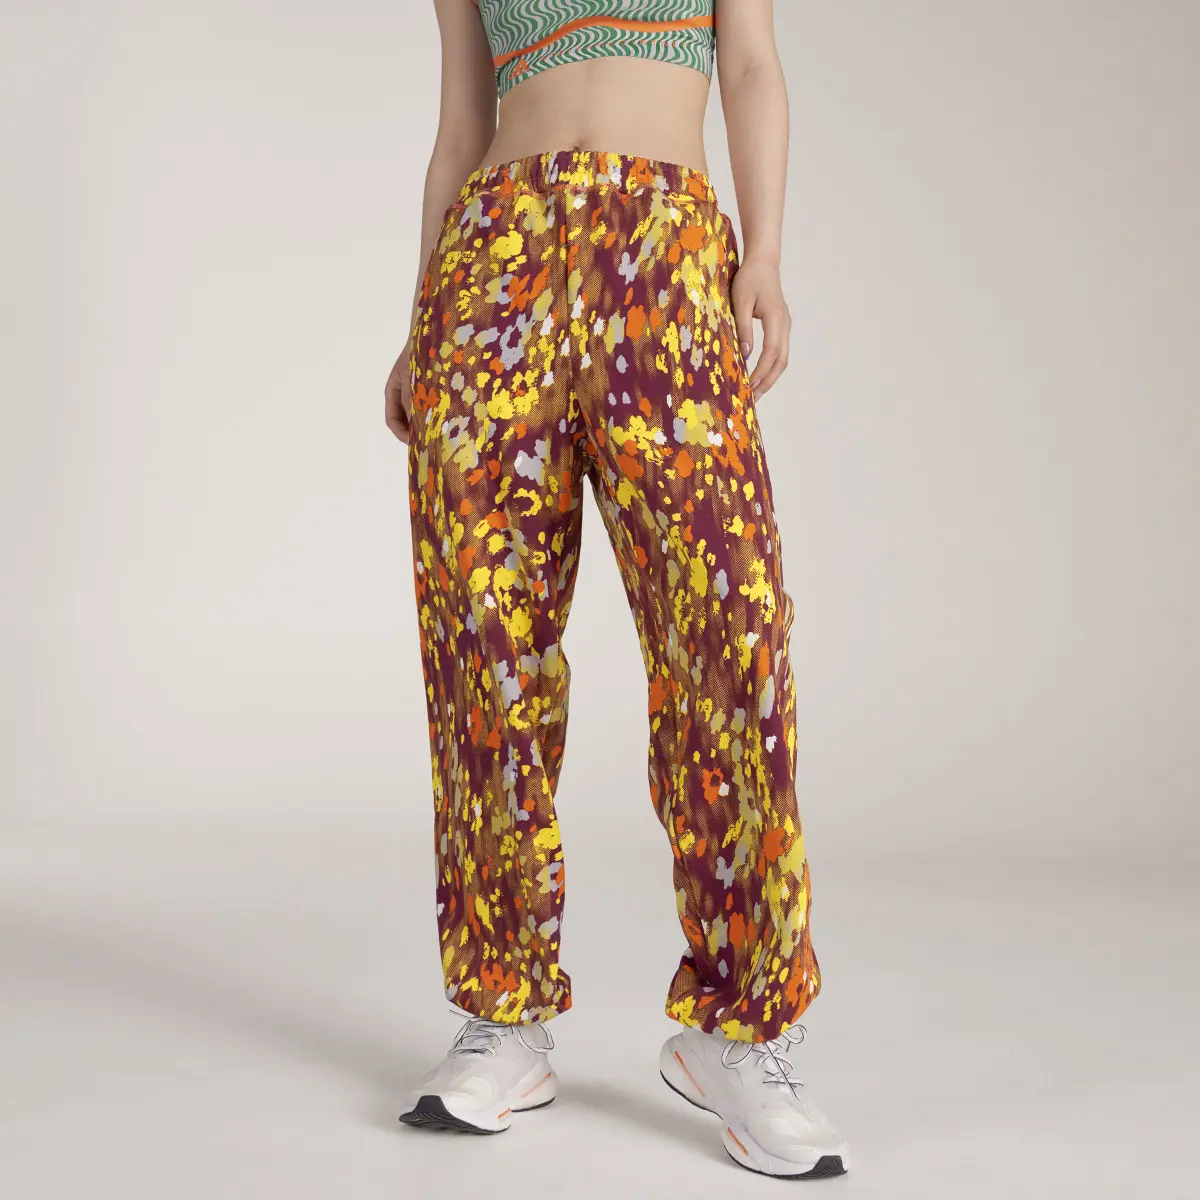 Adidas by Stella McCartney Floral Printed Woven Track Joggers. 1